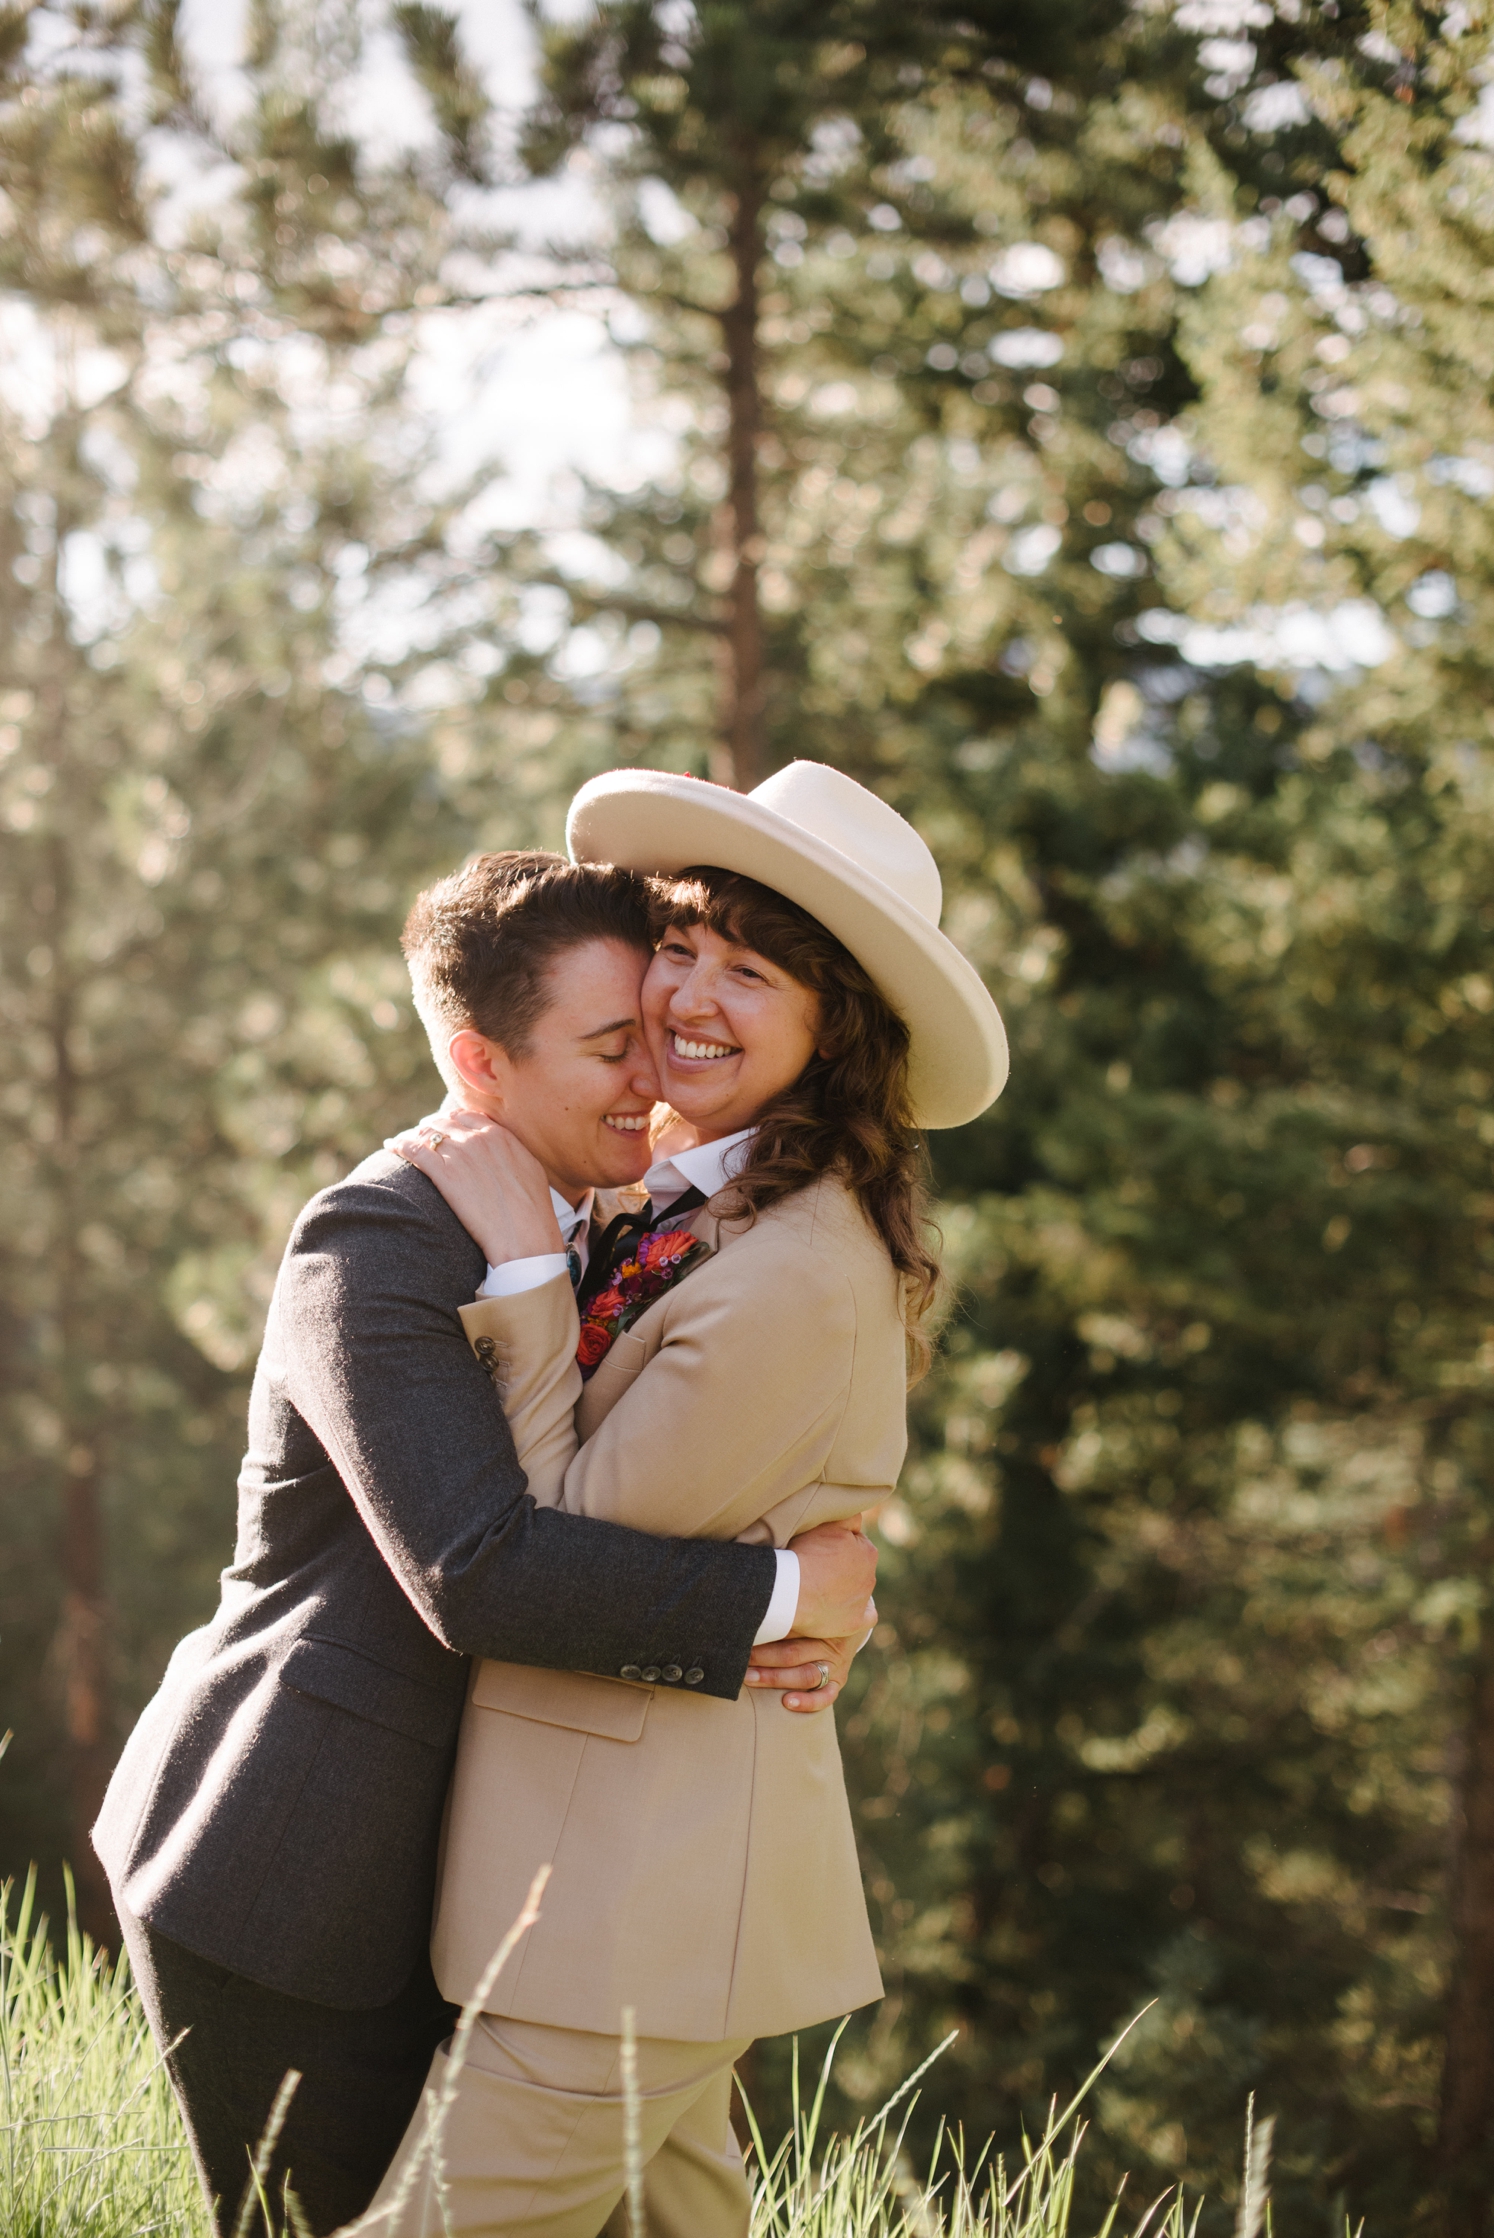 Couple hugging each other and laughing outdoors at Colorado wedding | McArthur Weddings and Events